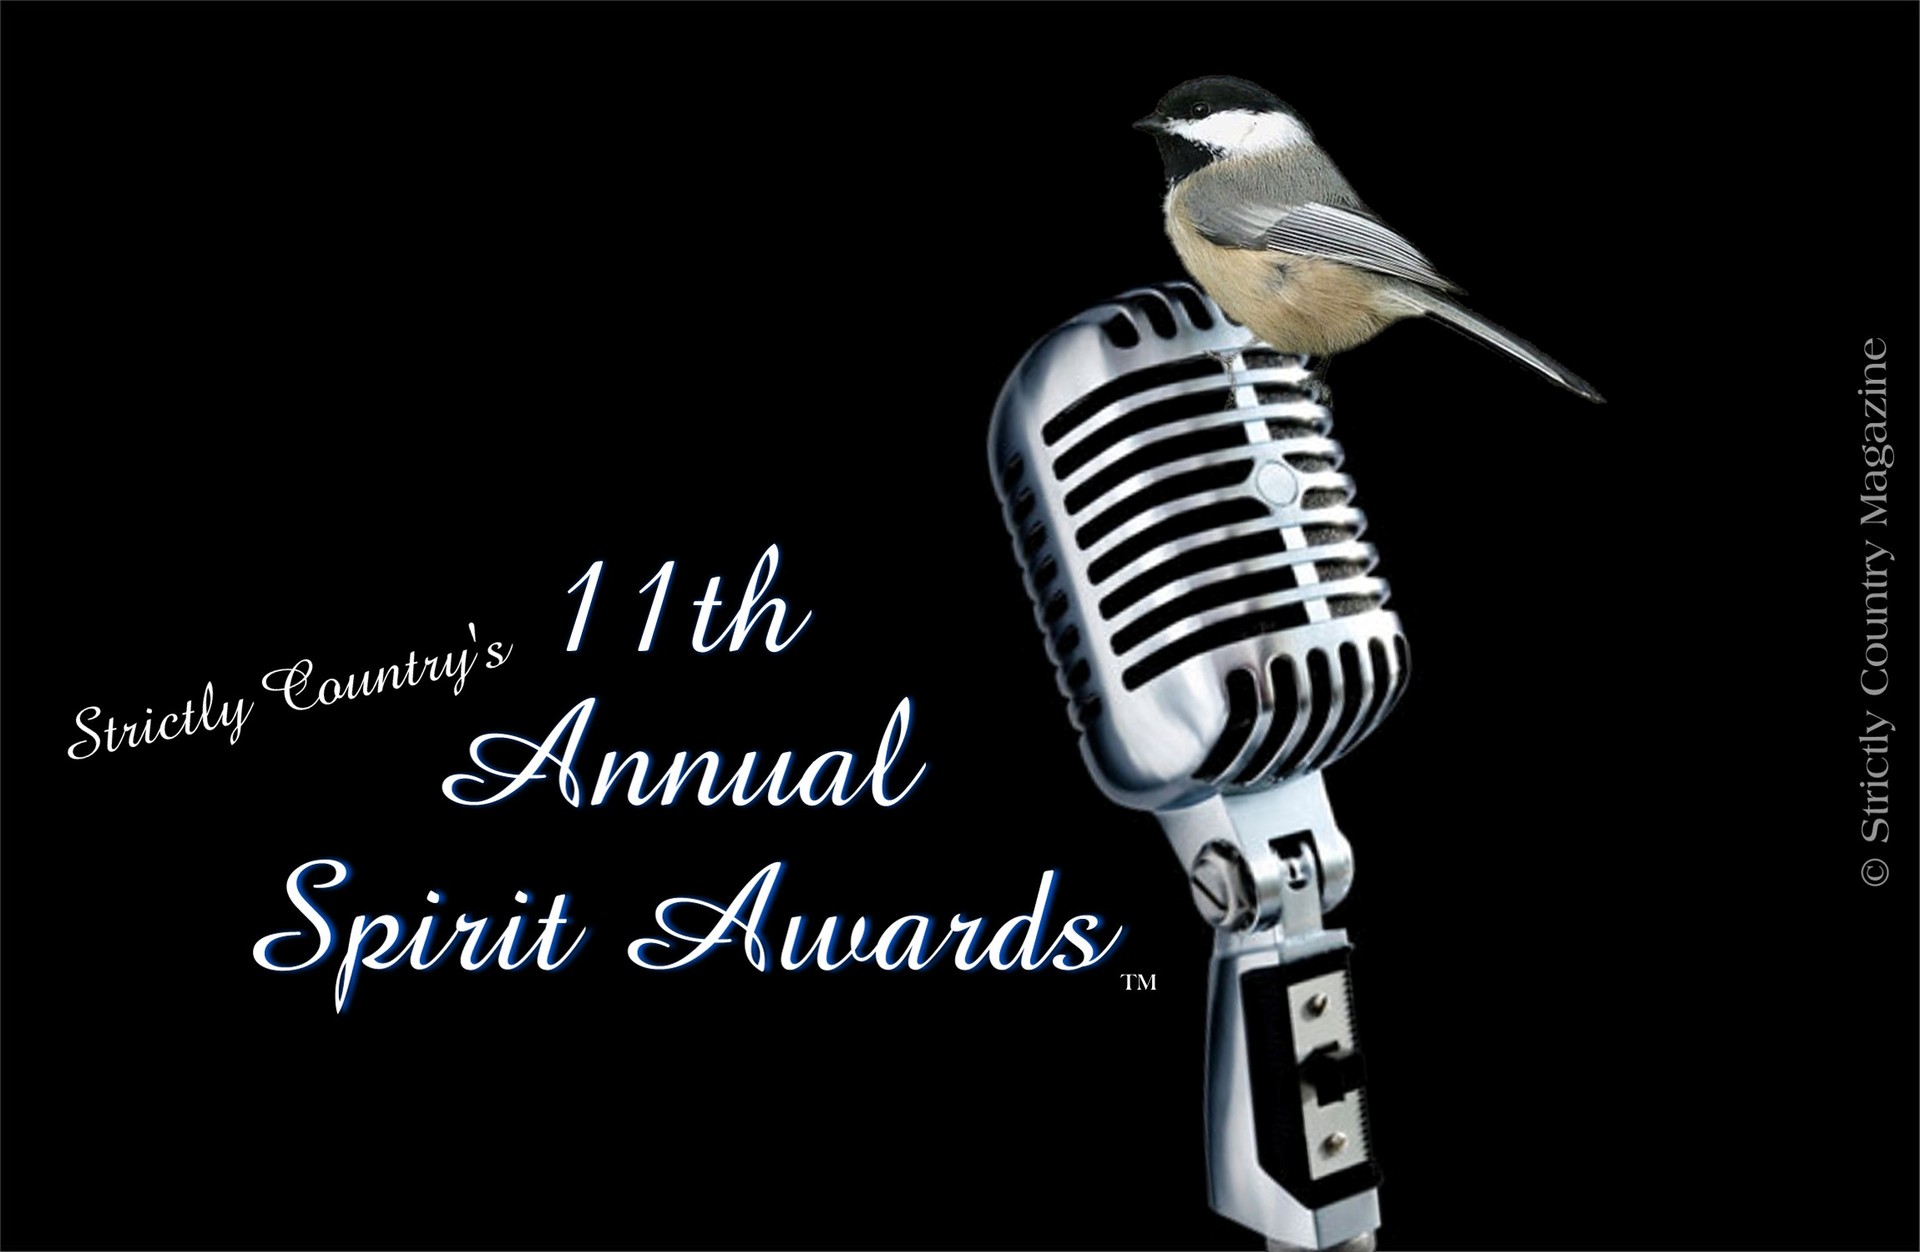 Strictly Country Magazine copyright 11th Annual Spirit Awards official logo